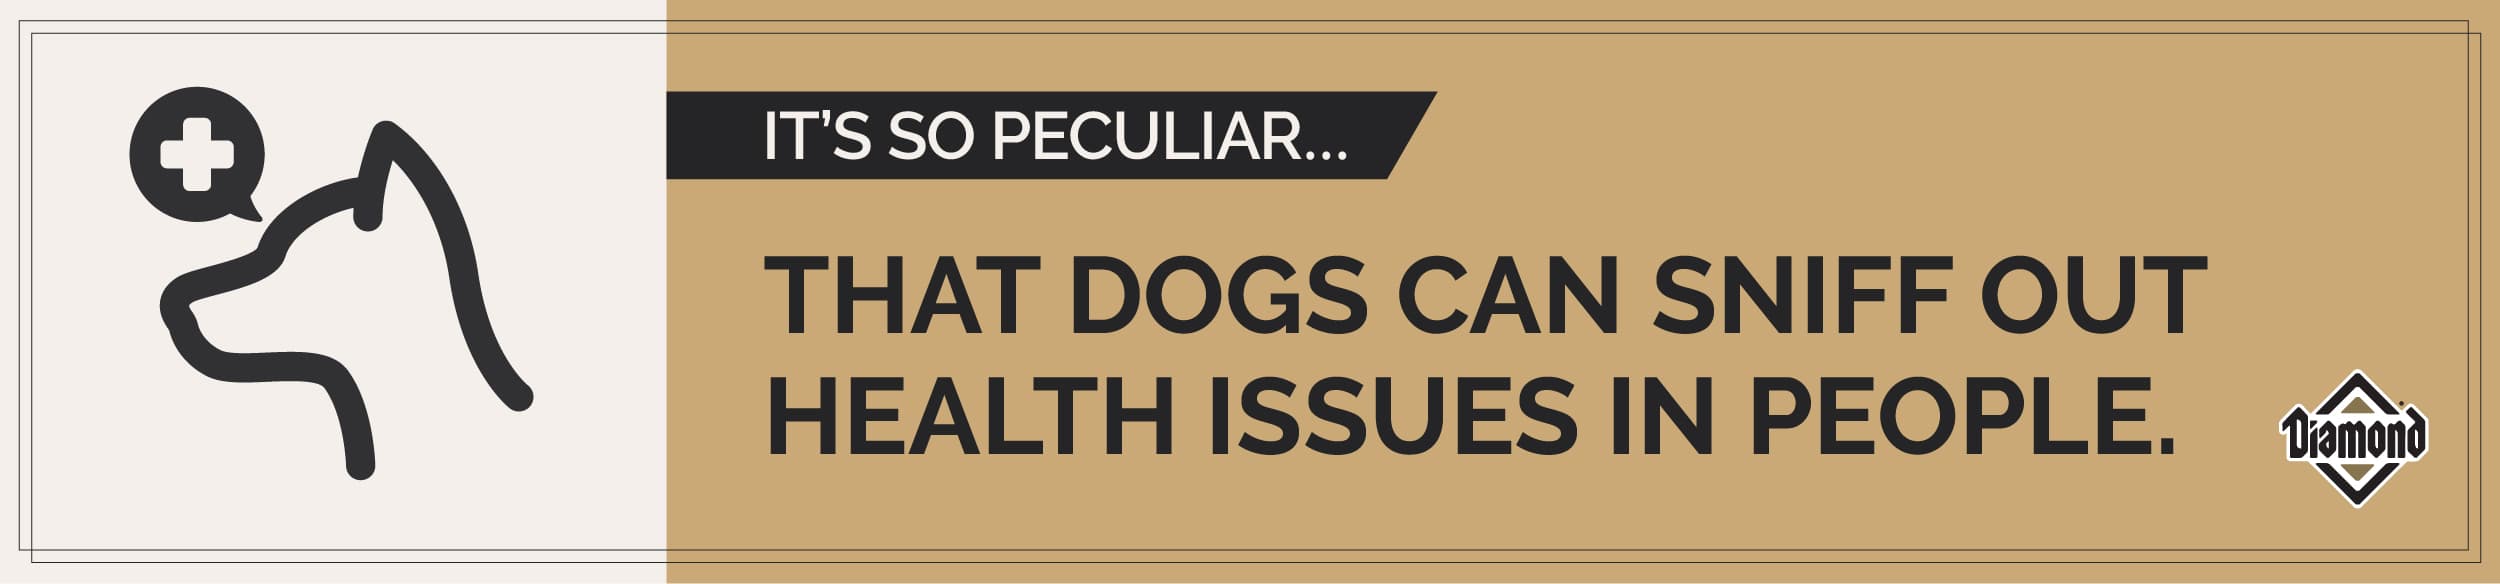 It’s So Peculiar: Dogs Can Sniff Out Health Issues in People Graphic | Diamond Pet Foods